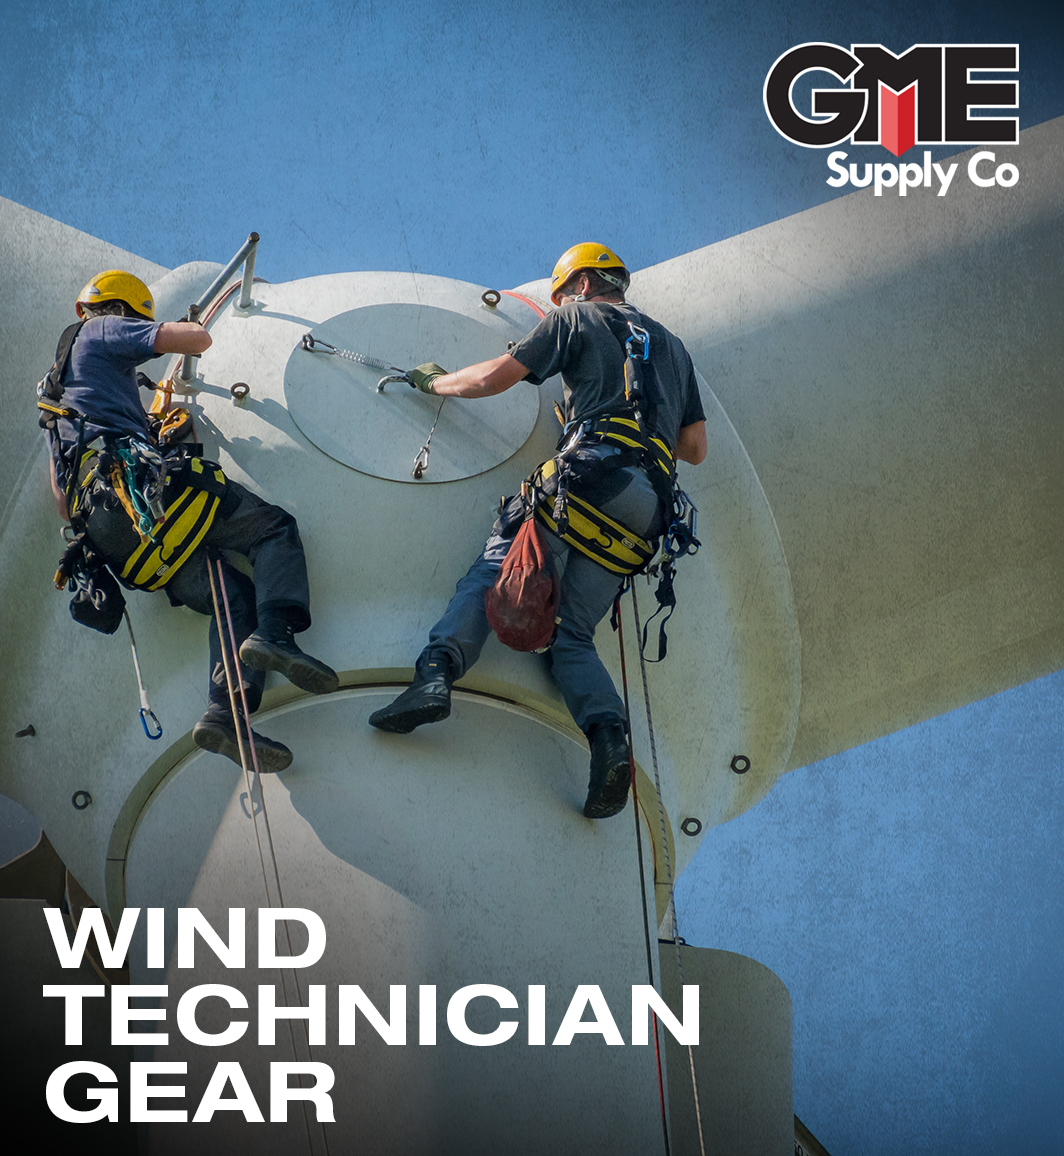 Wind technician gear and equipment at GME